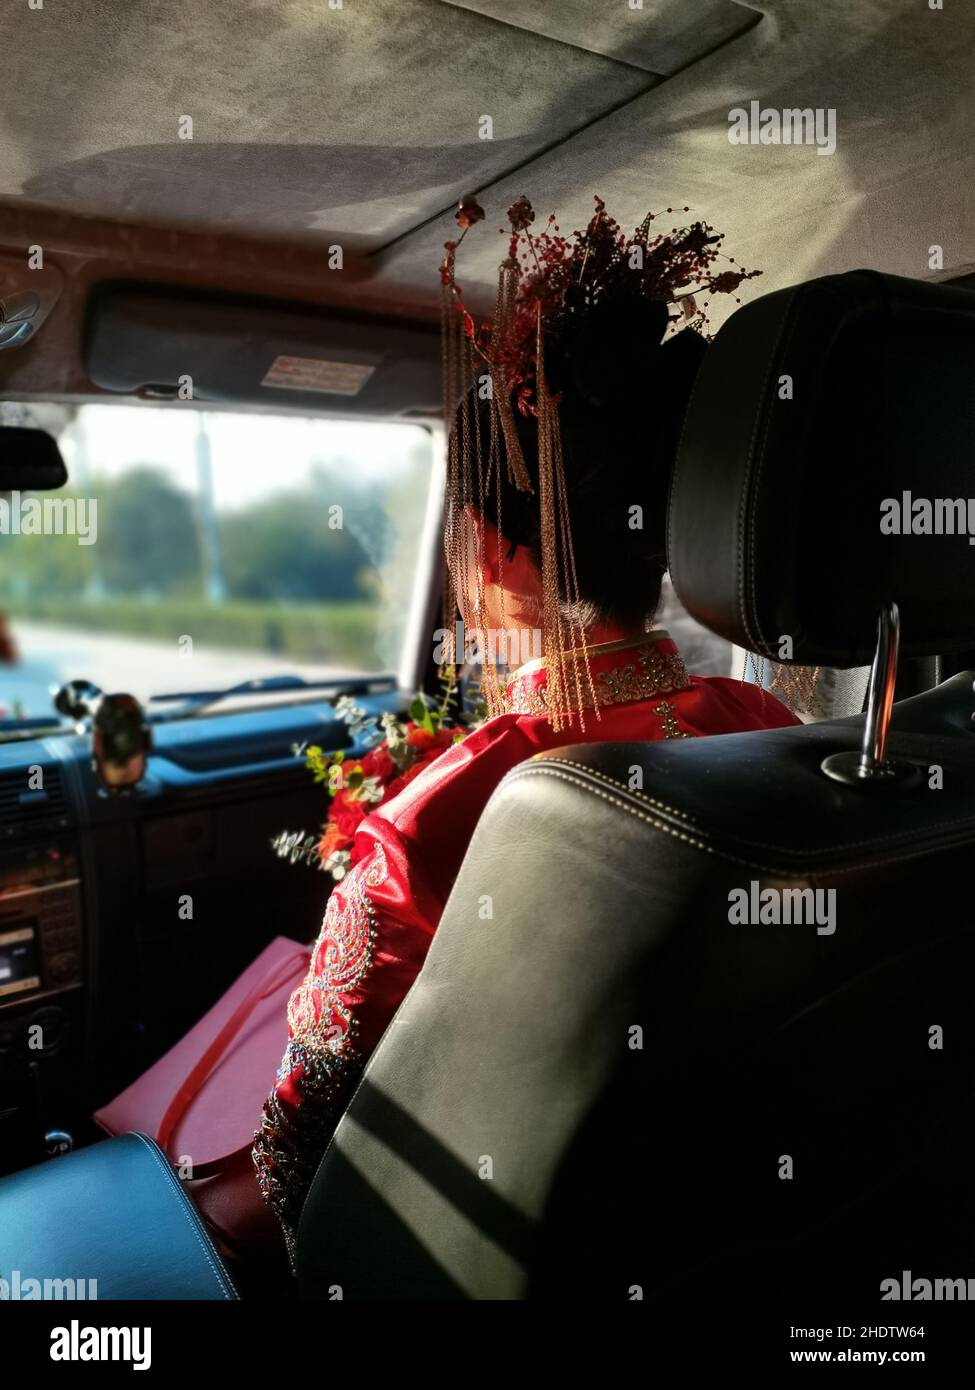 Vertical closeup of the woman sitting on the front seat wearing a red dress with head decoration. Stock Photo